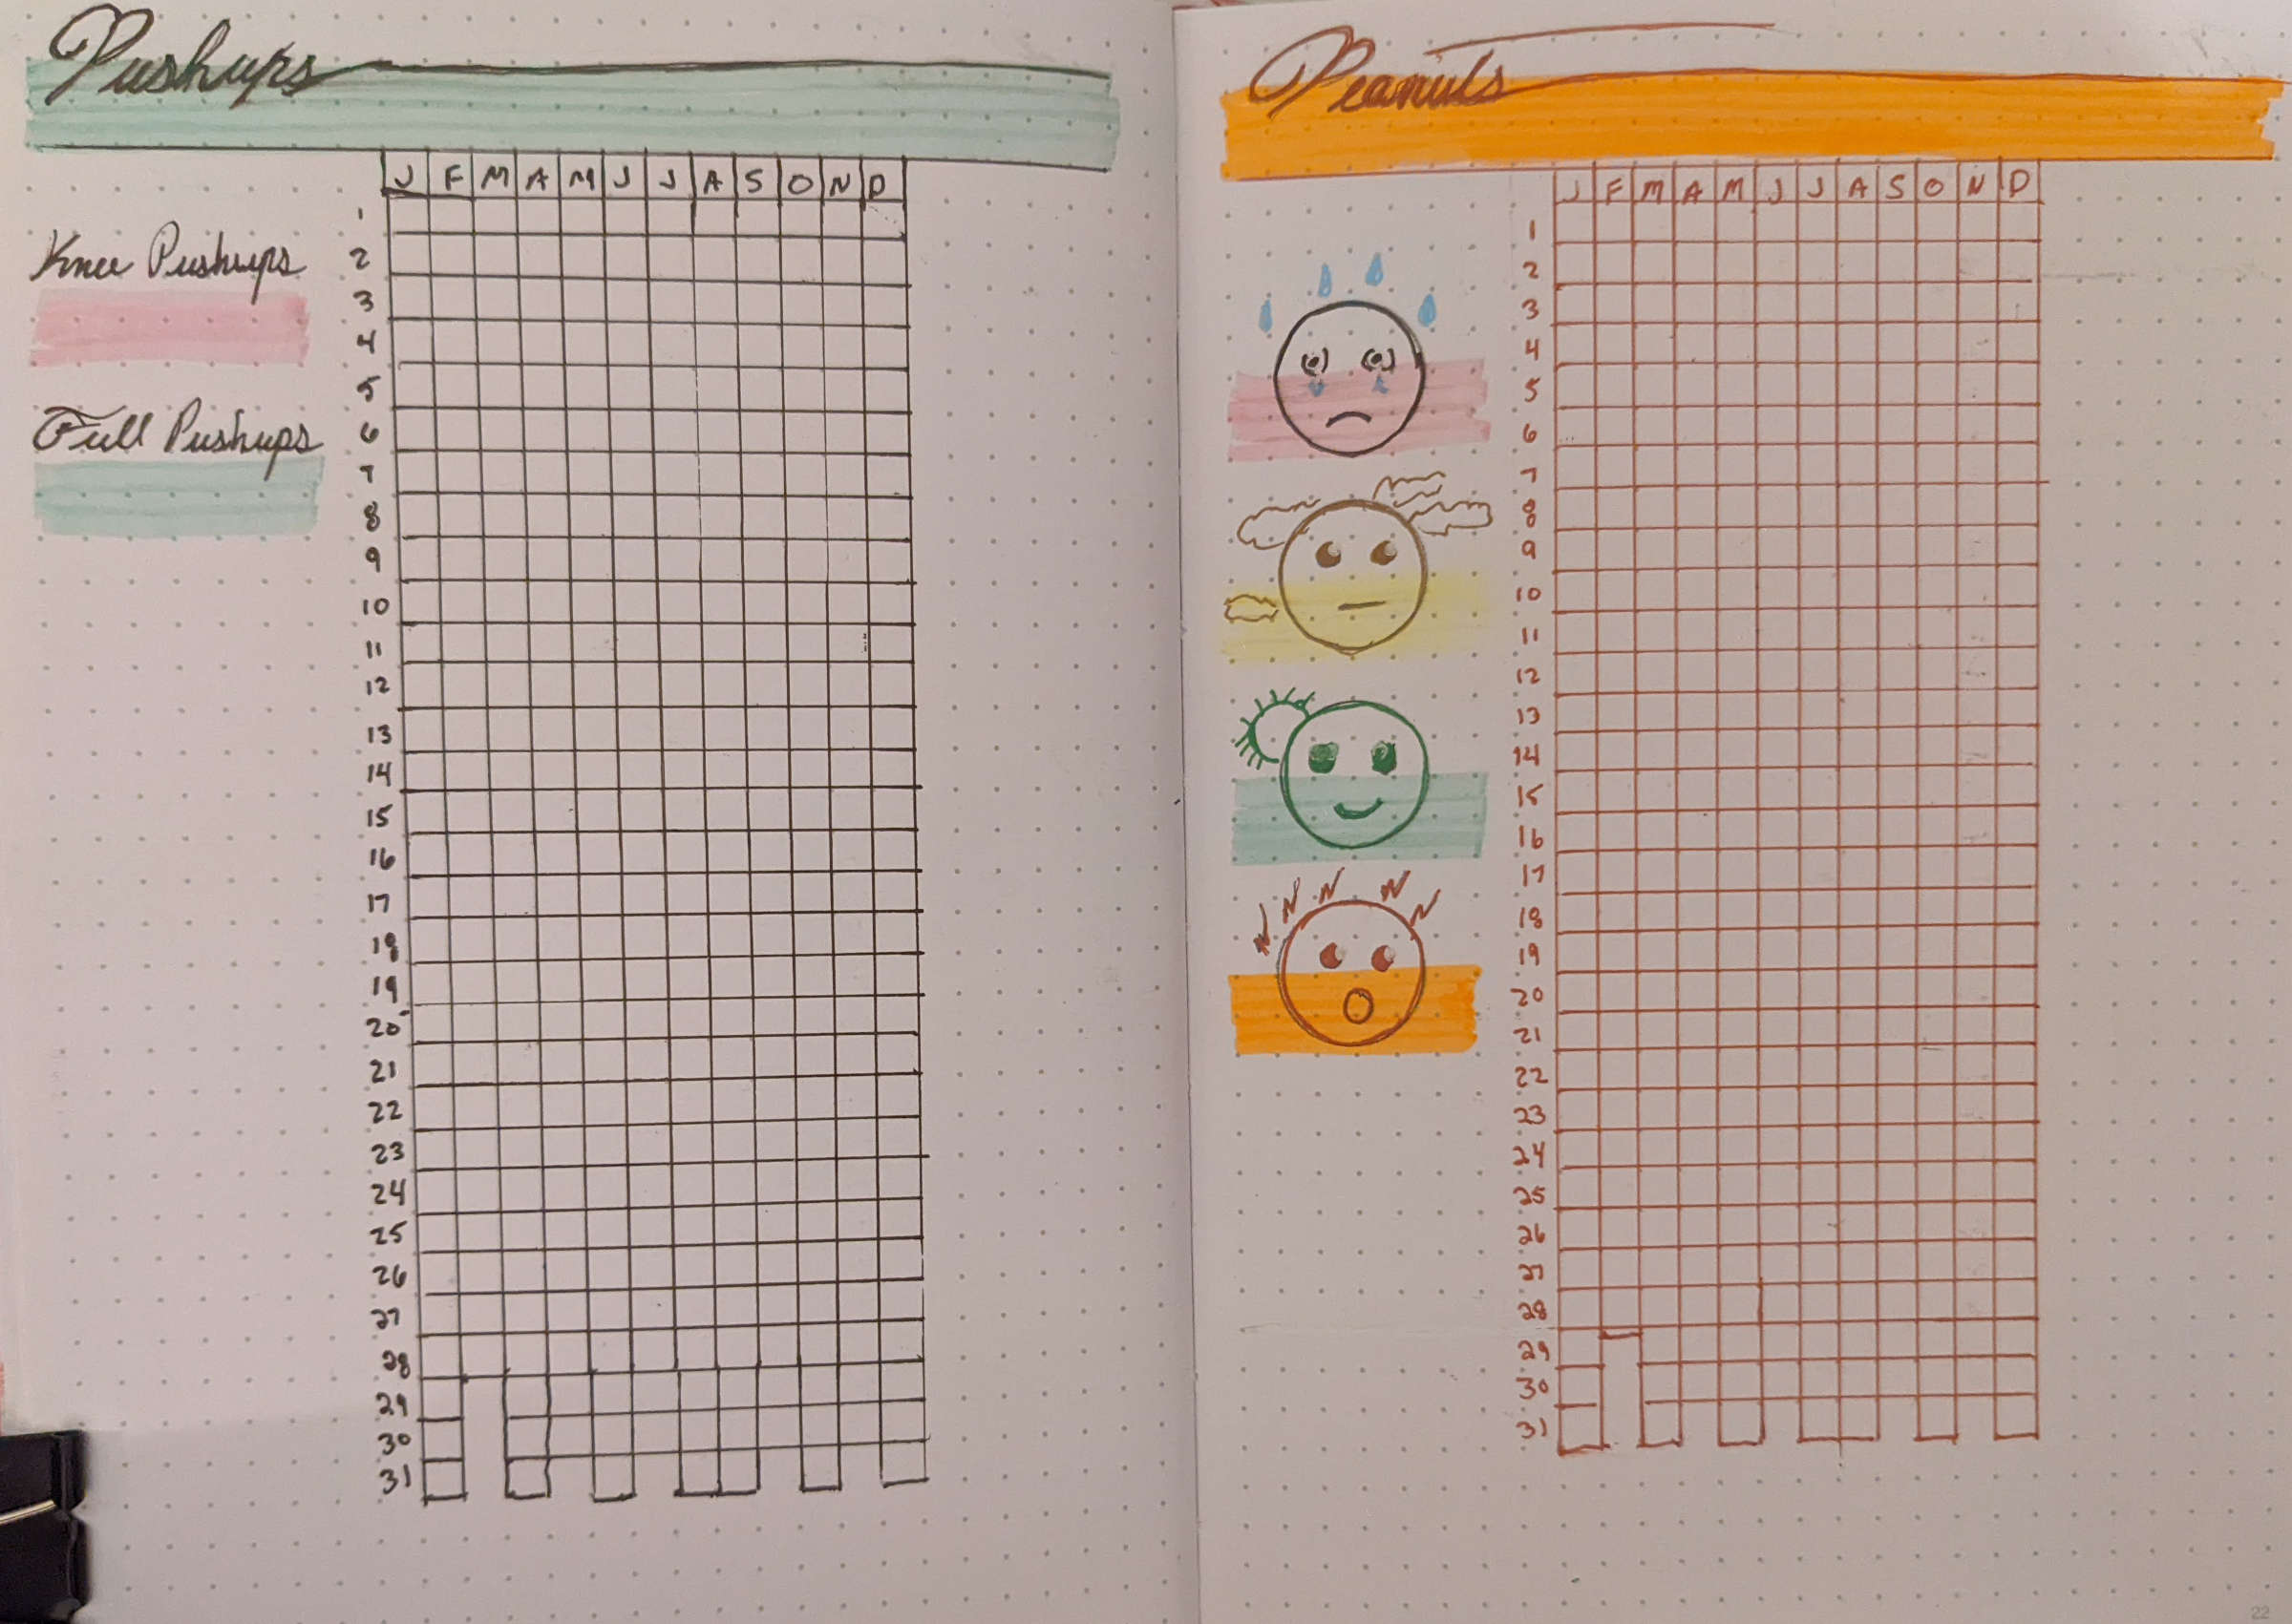 Two-page bullet journal spread. On the left is a “pushups” tracker. On the right is a “peanuts” tracker.